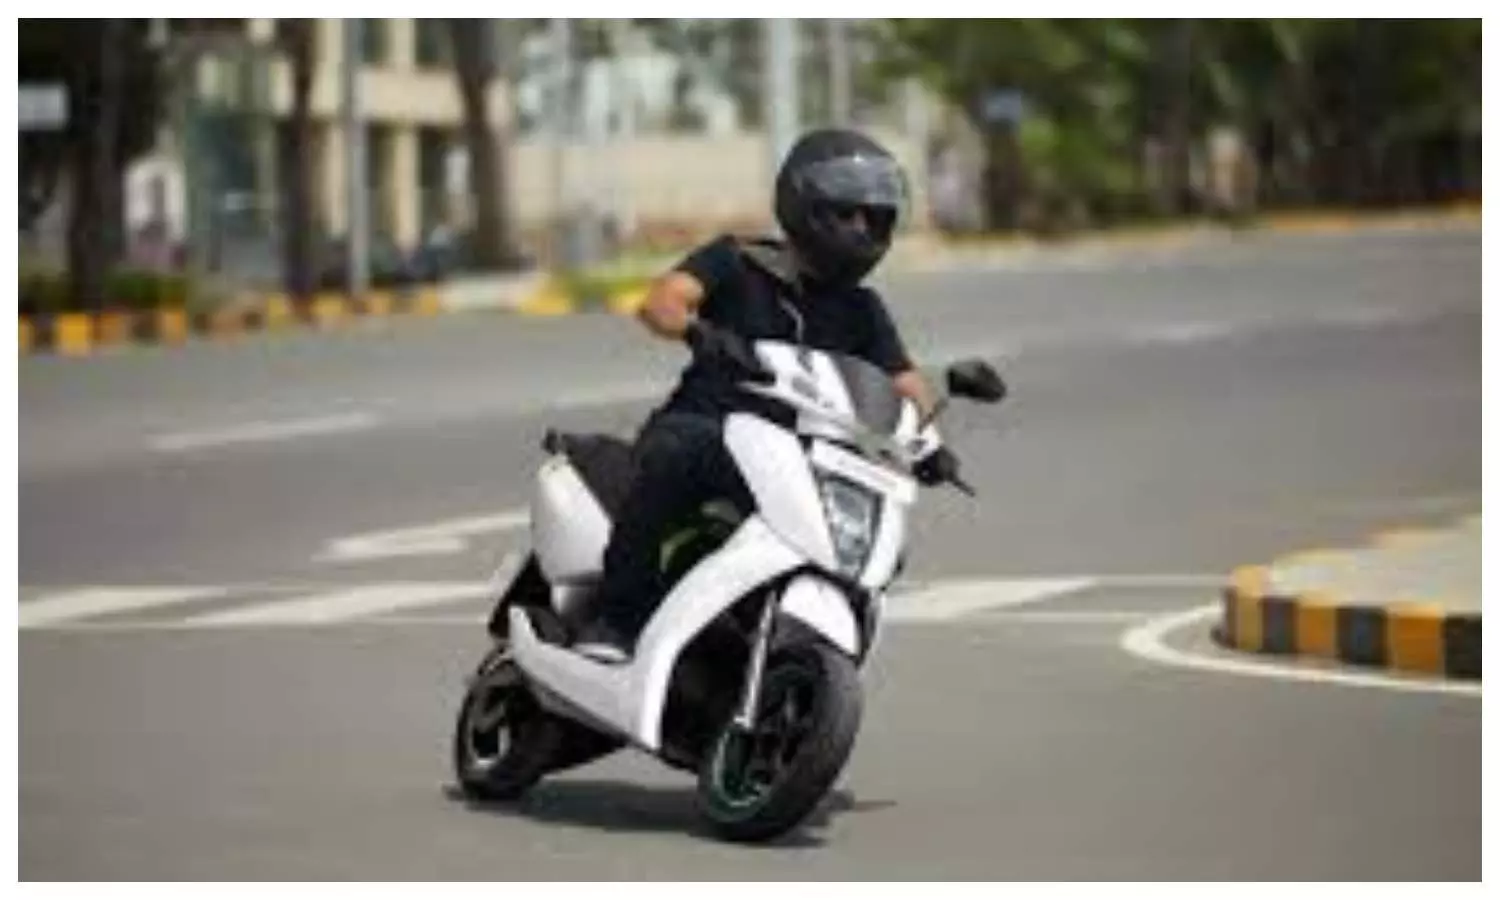 Electric Two-Wheelers